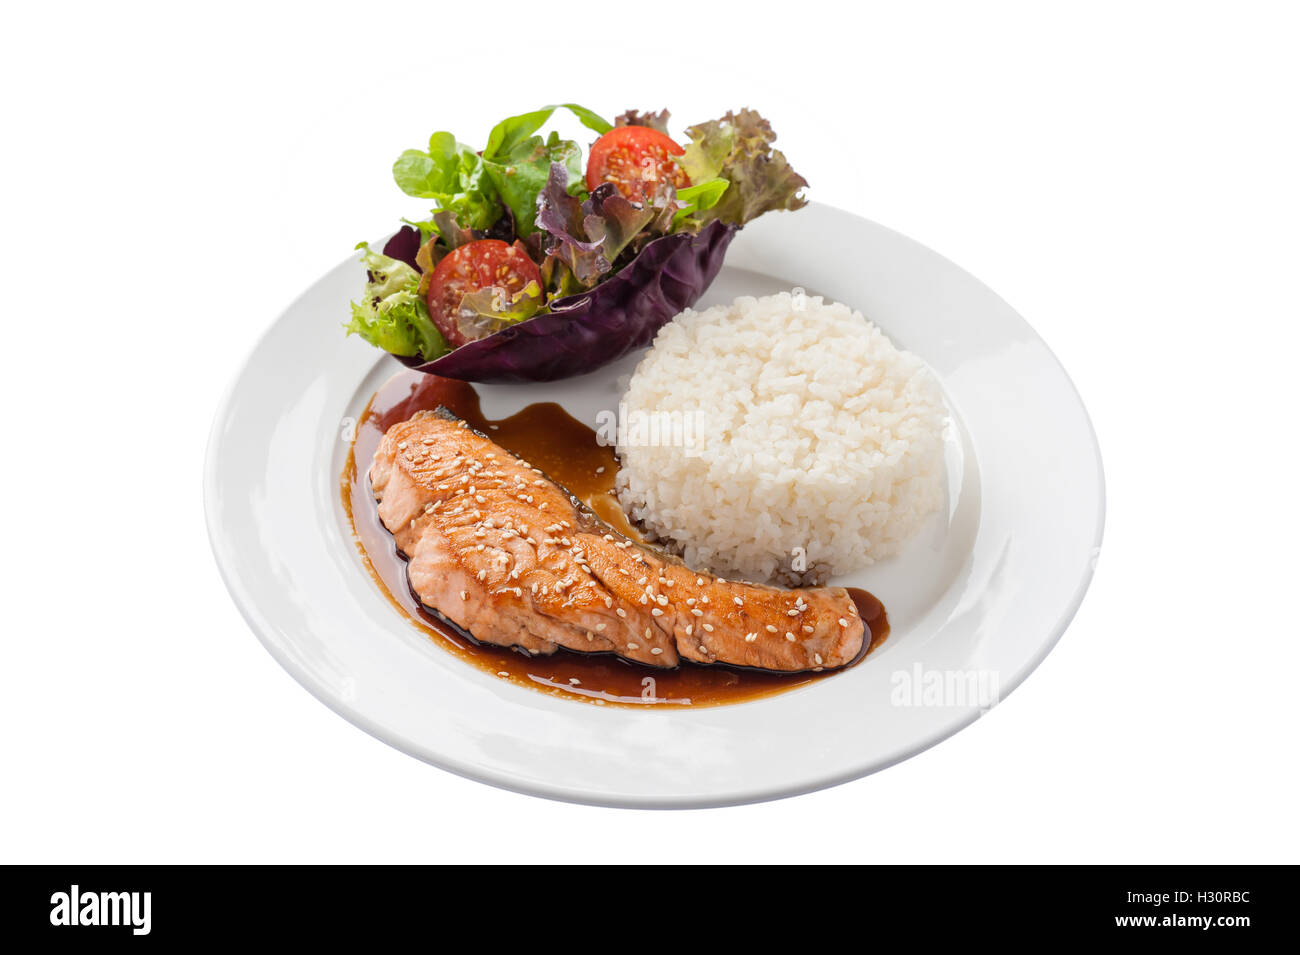 Front view of Fusion food style grilled salmon dressed with Japanese sweet sauce (Teriyaki) including Thai rice garnished with v Stock Photo